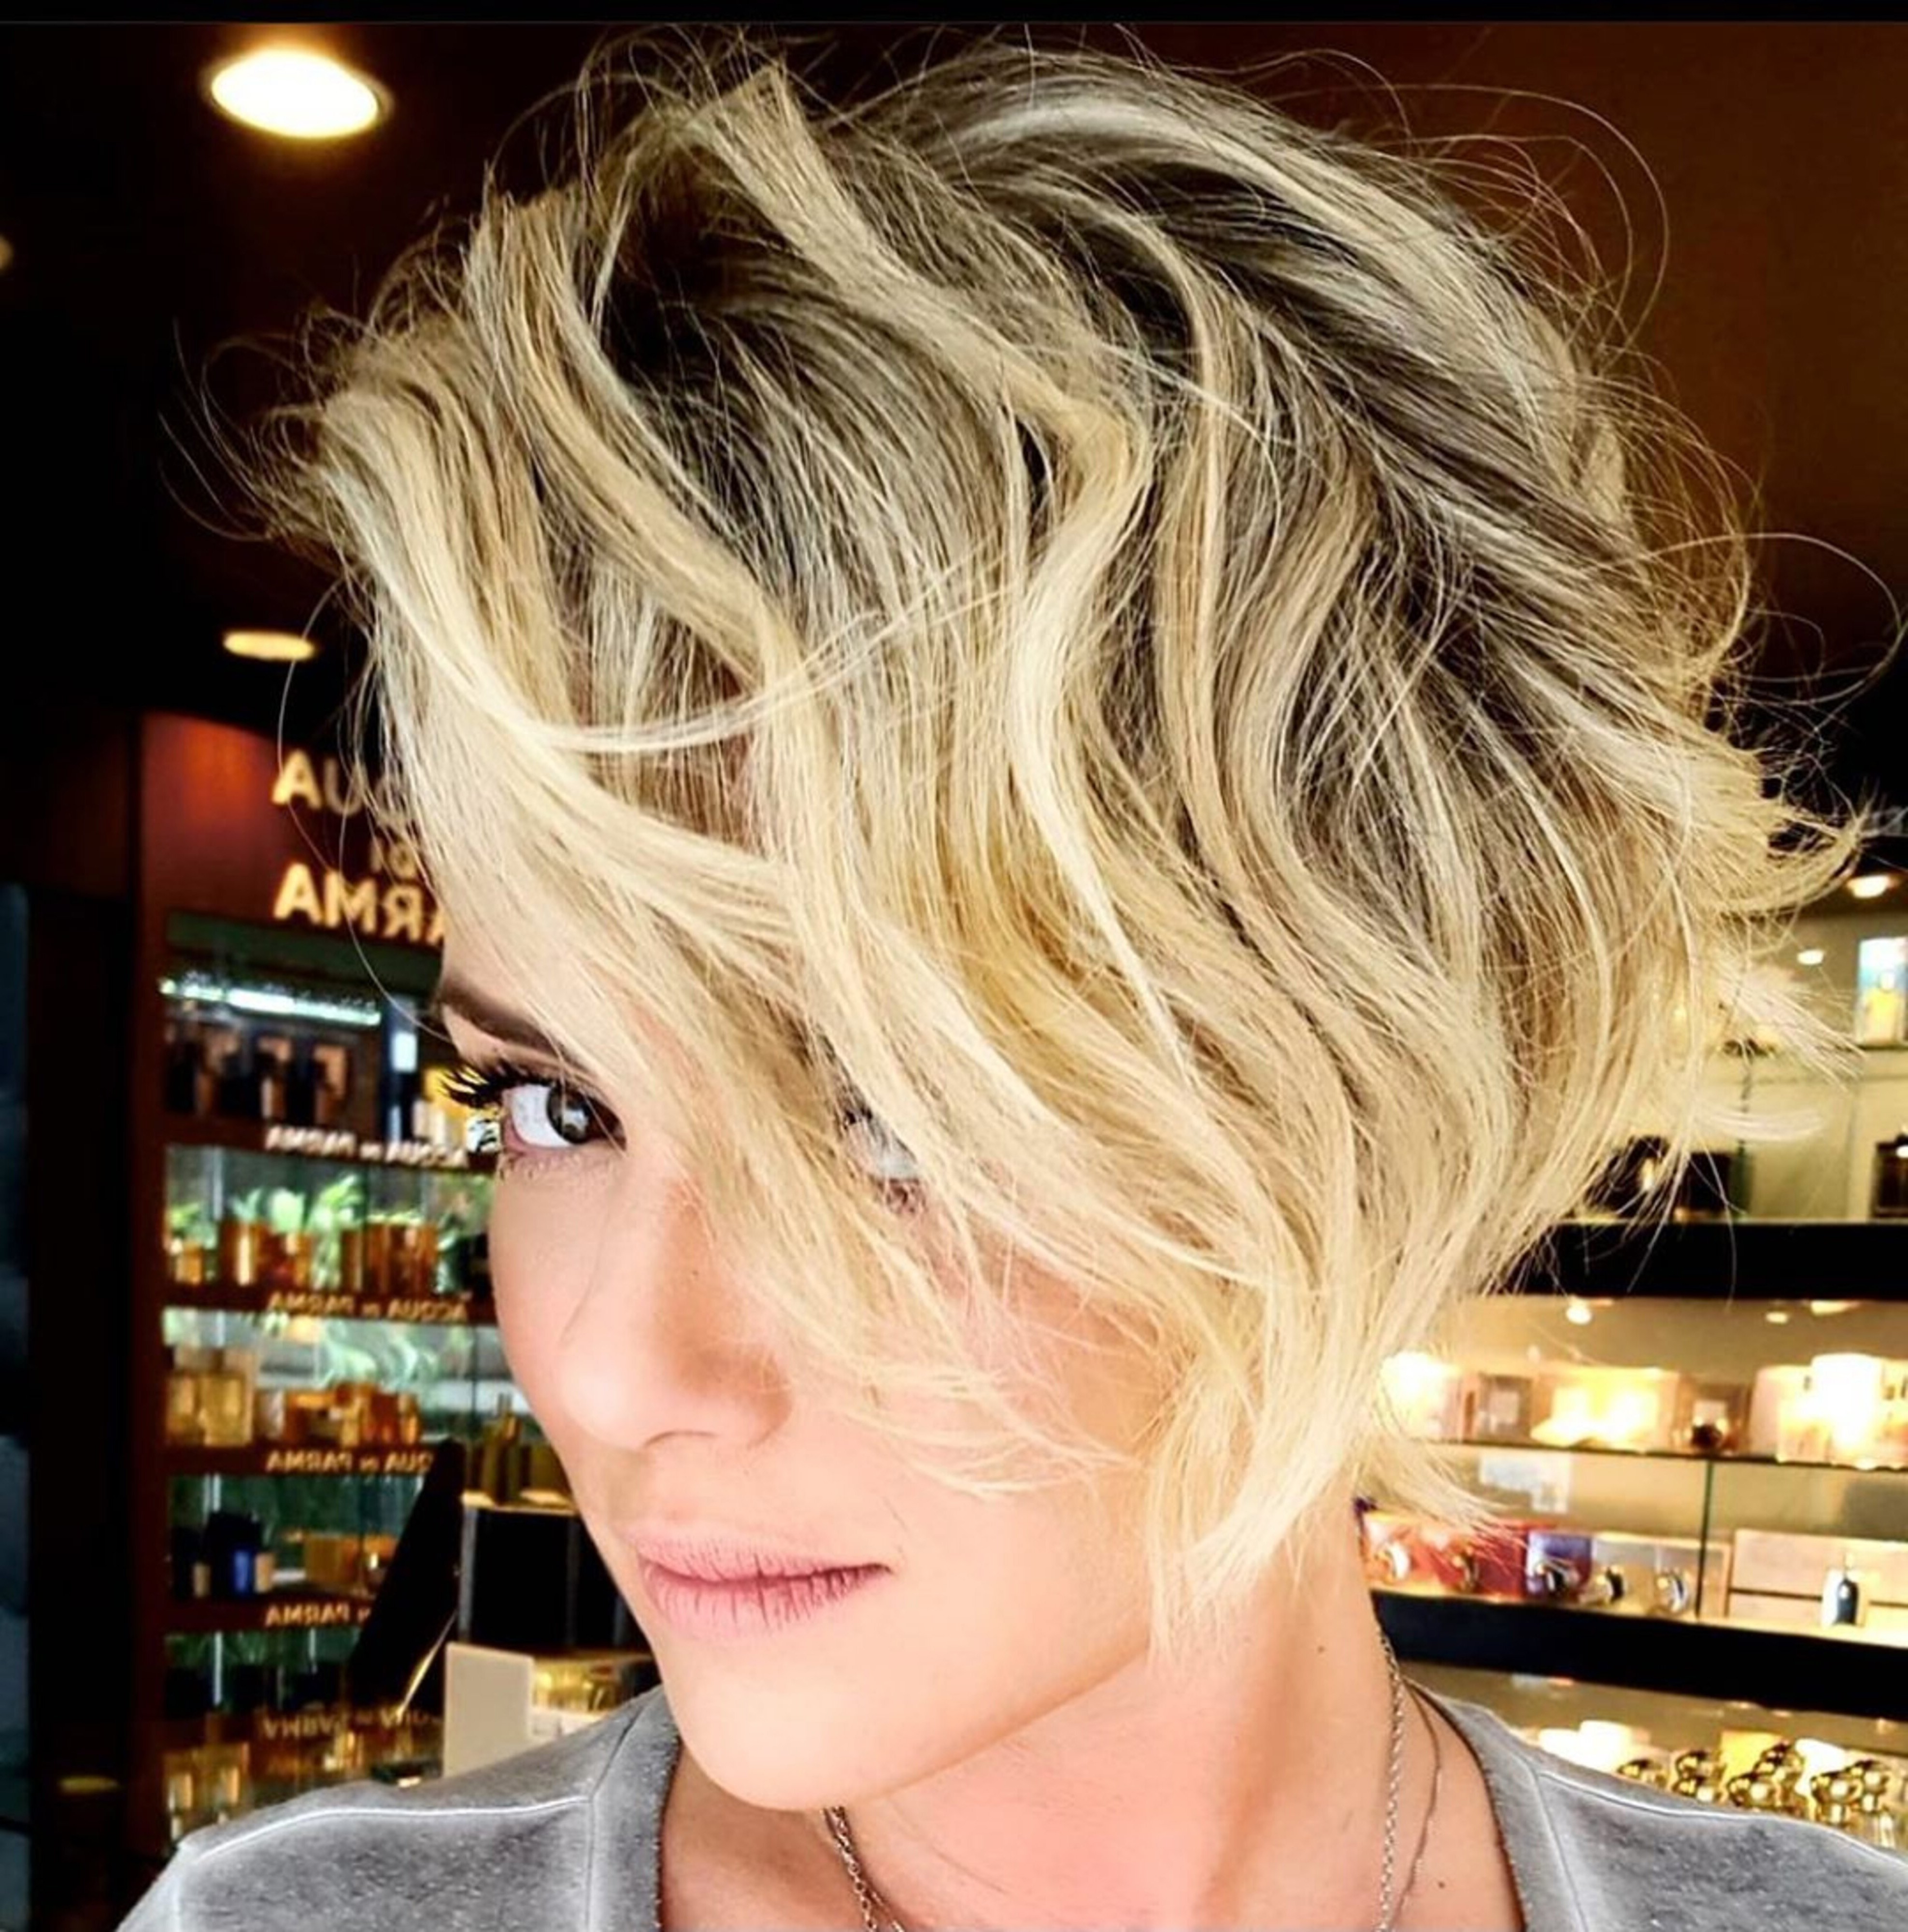 43 Long Pixie Hairstyle Ideas Look Elegant And Stylish Round The Clock